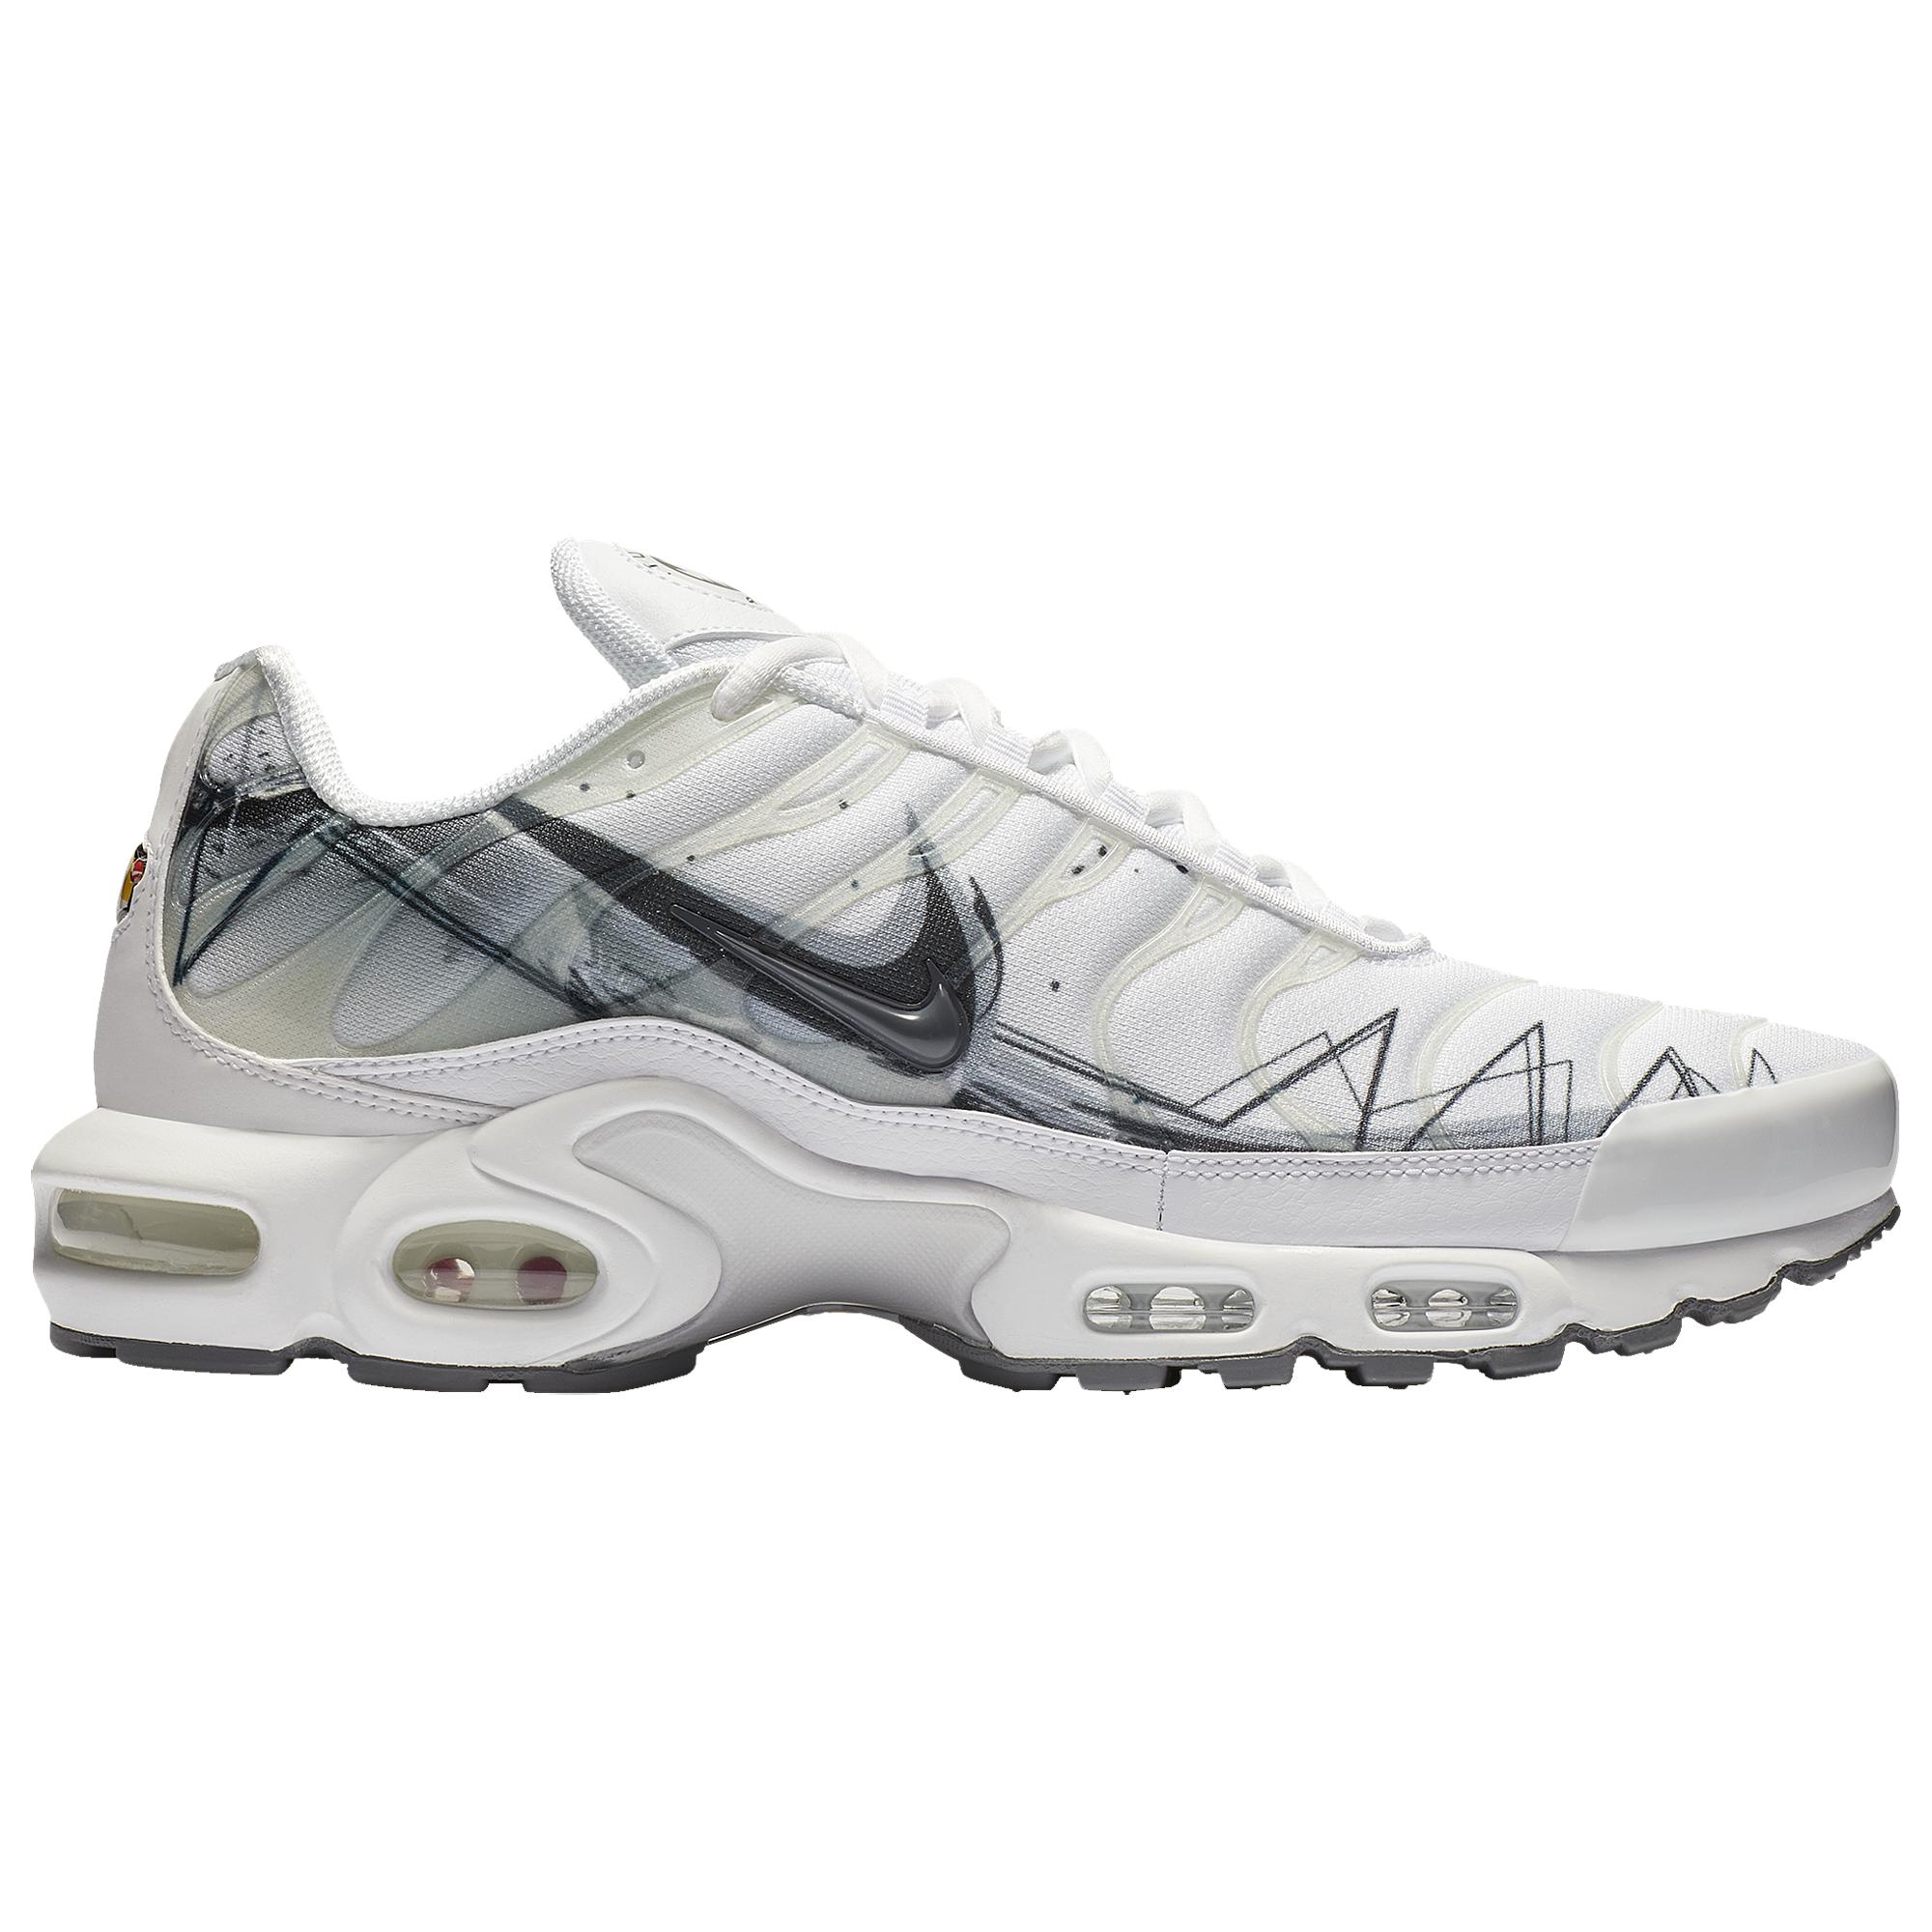 Nike Leather Air Max Plus Se Shark Casual Running Shoes for Men - Lyst